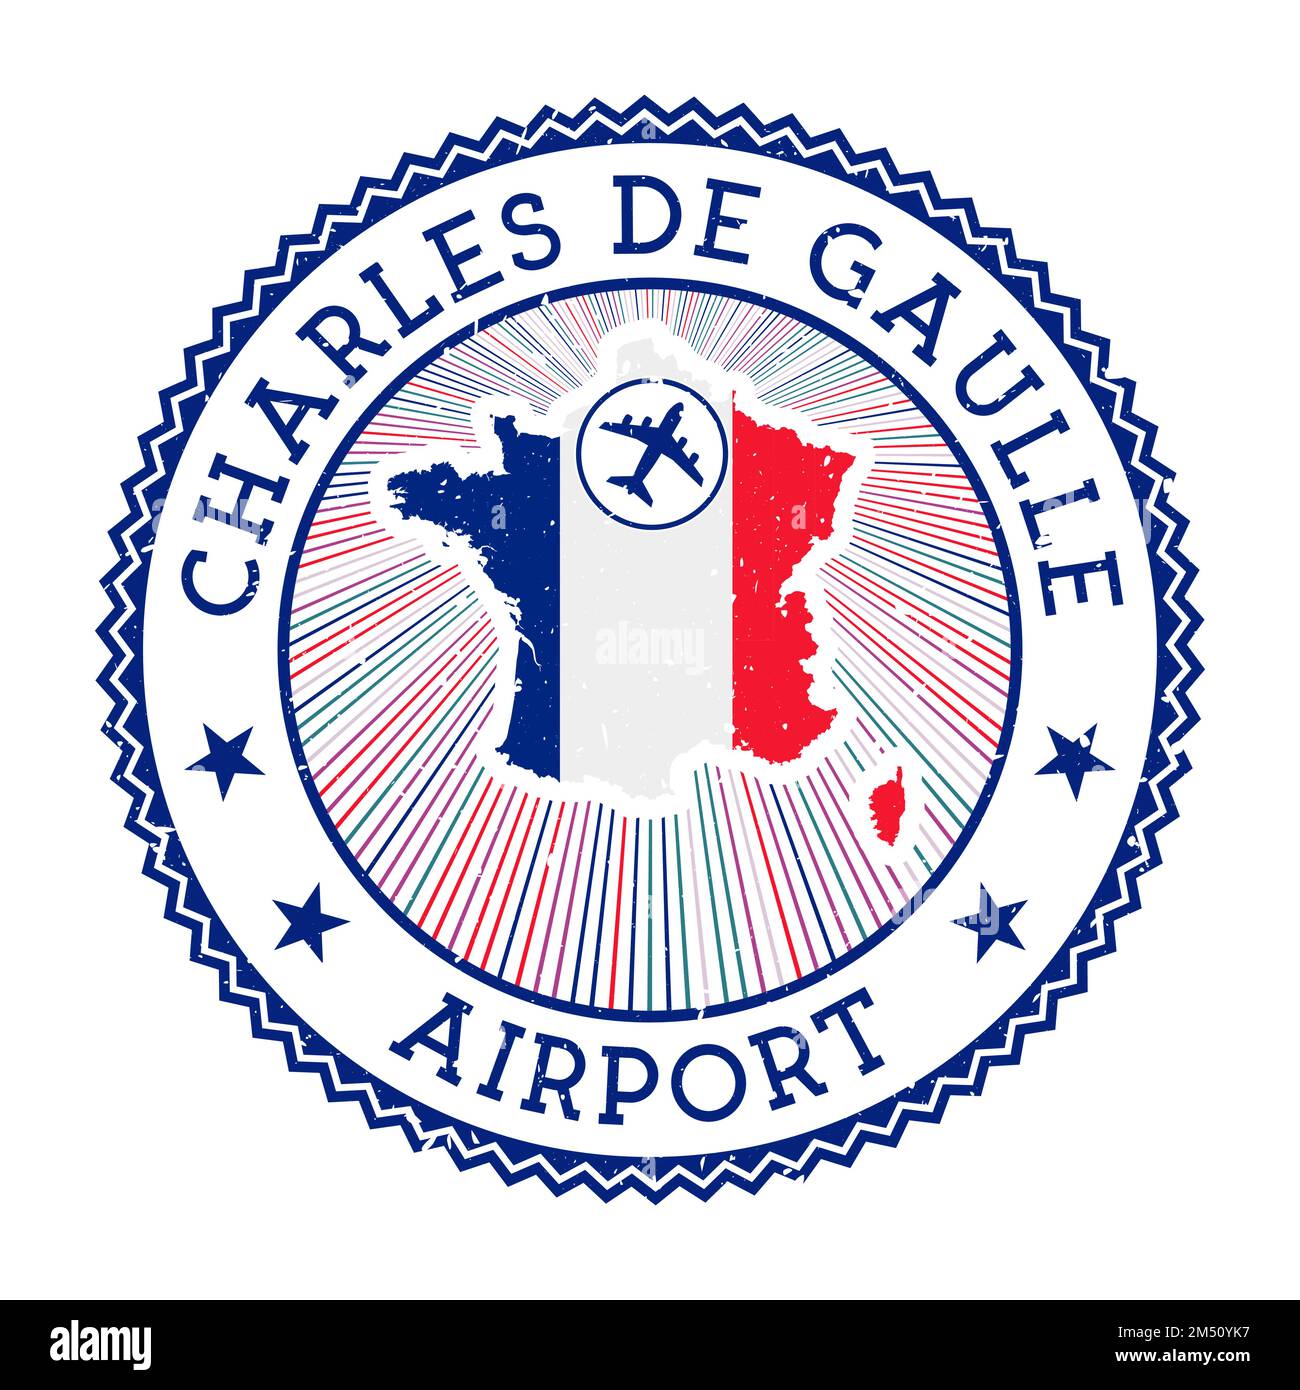 Charles de Gaulle Airport stamp. Airport logo vector illustration. Paris aeroport with country flag. Stock Vector